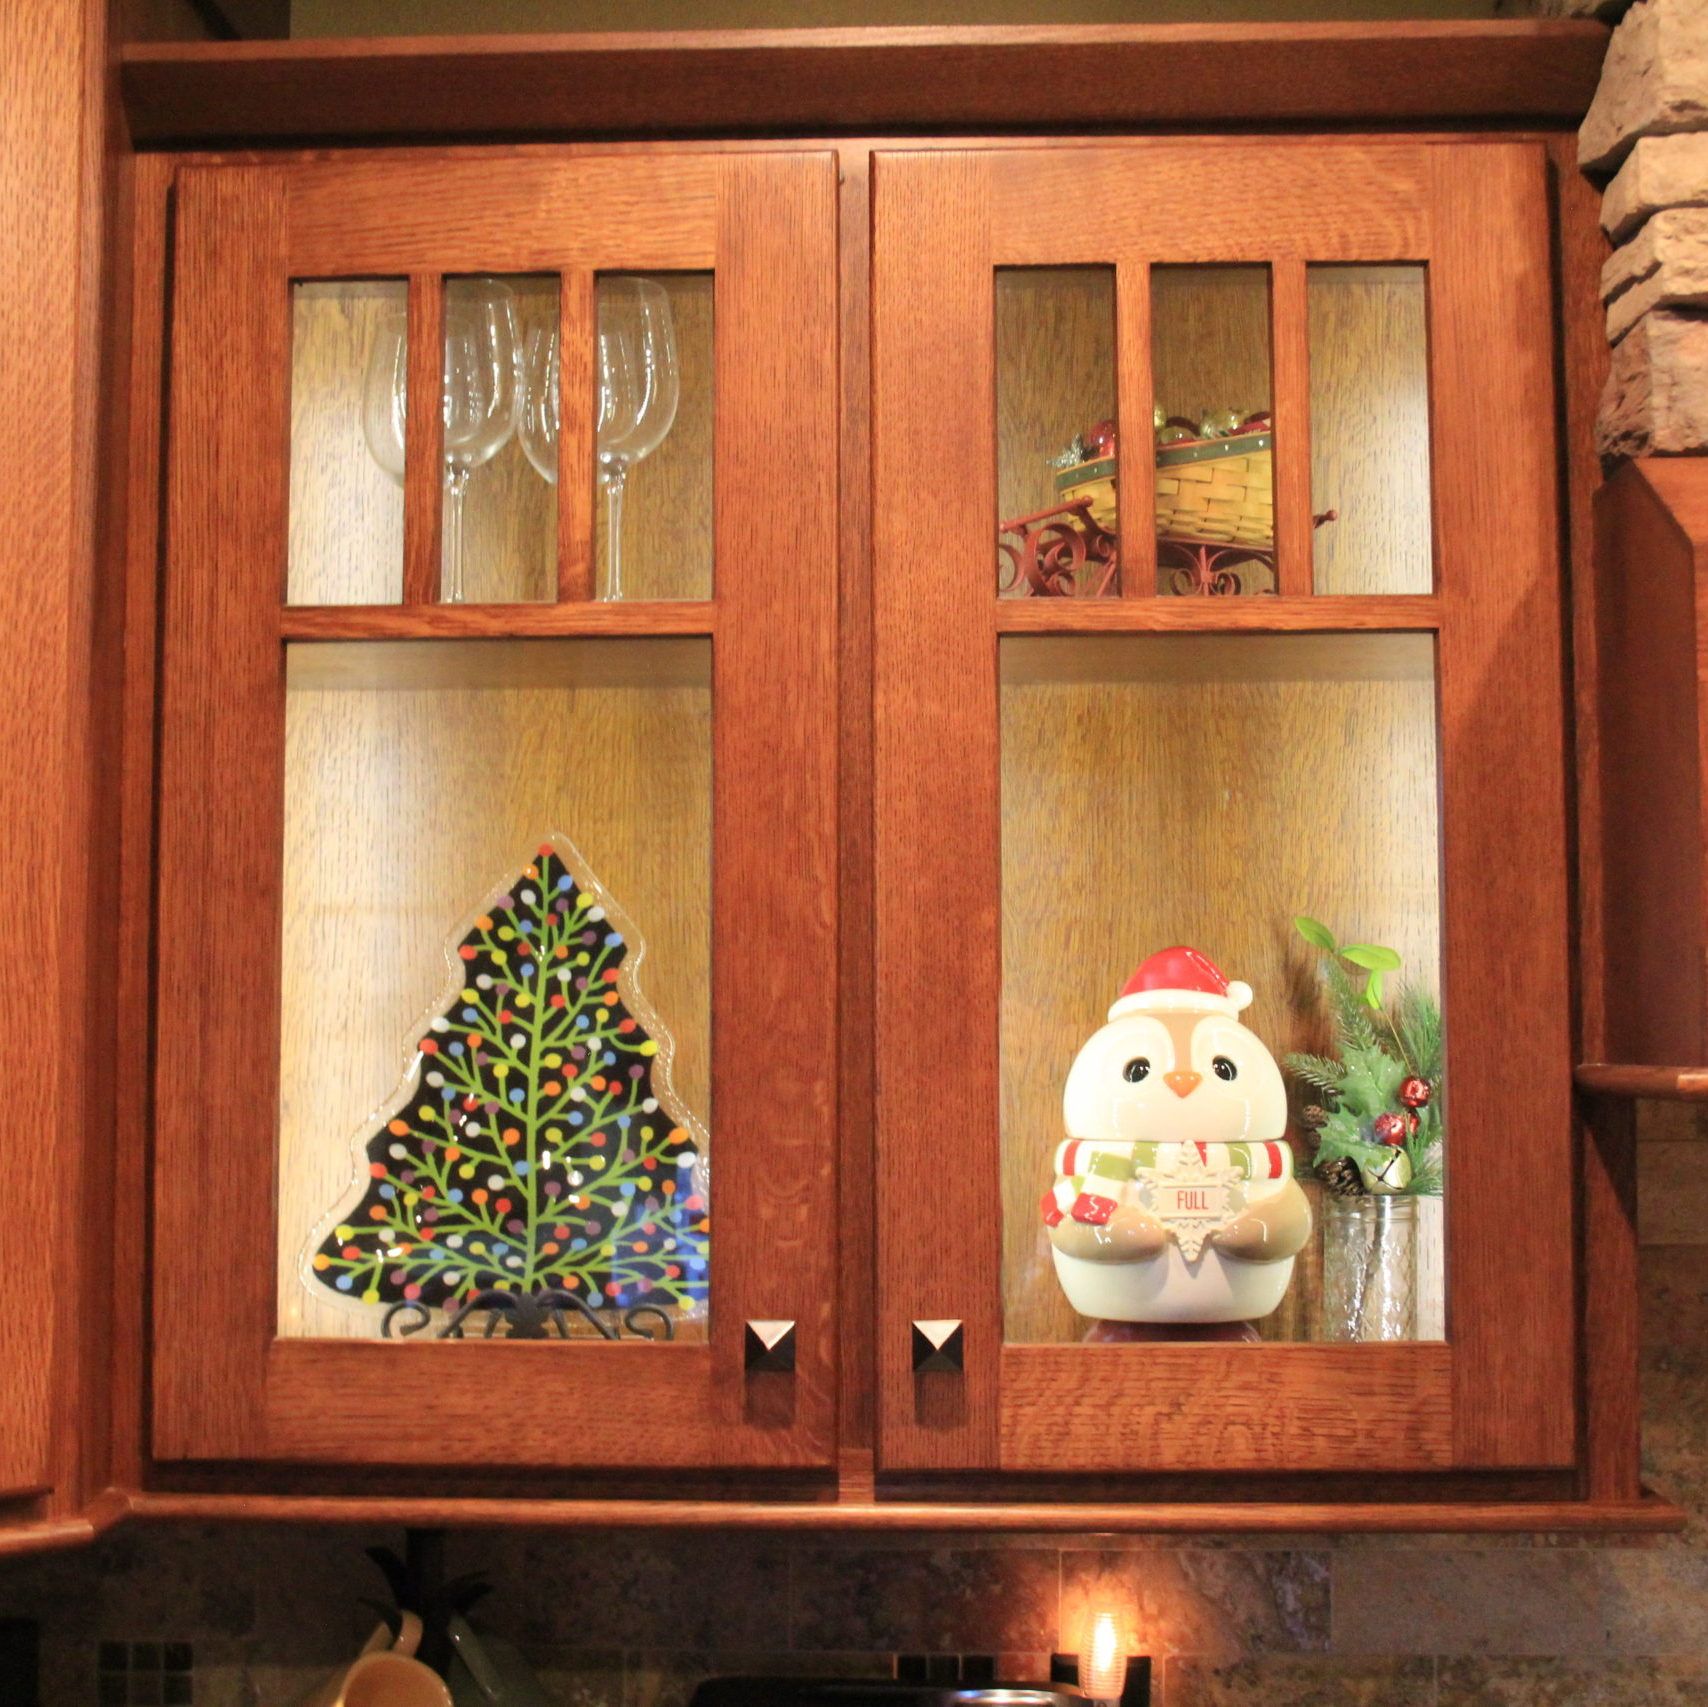 My glass display shelving is adjustable and for the holidays I remove a shelf. I found my owls in Holiday dress and with a Peggy Karr plate and Longaberger sleigh this looks cute together.